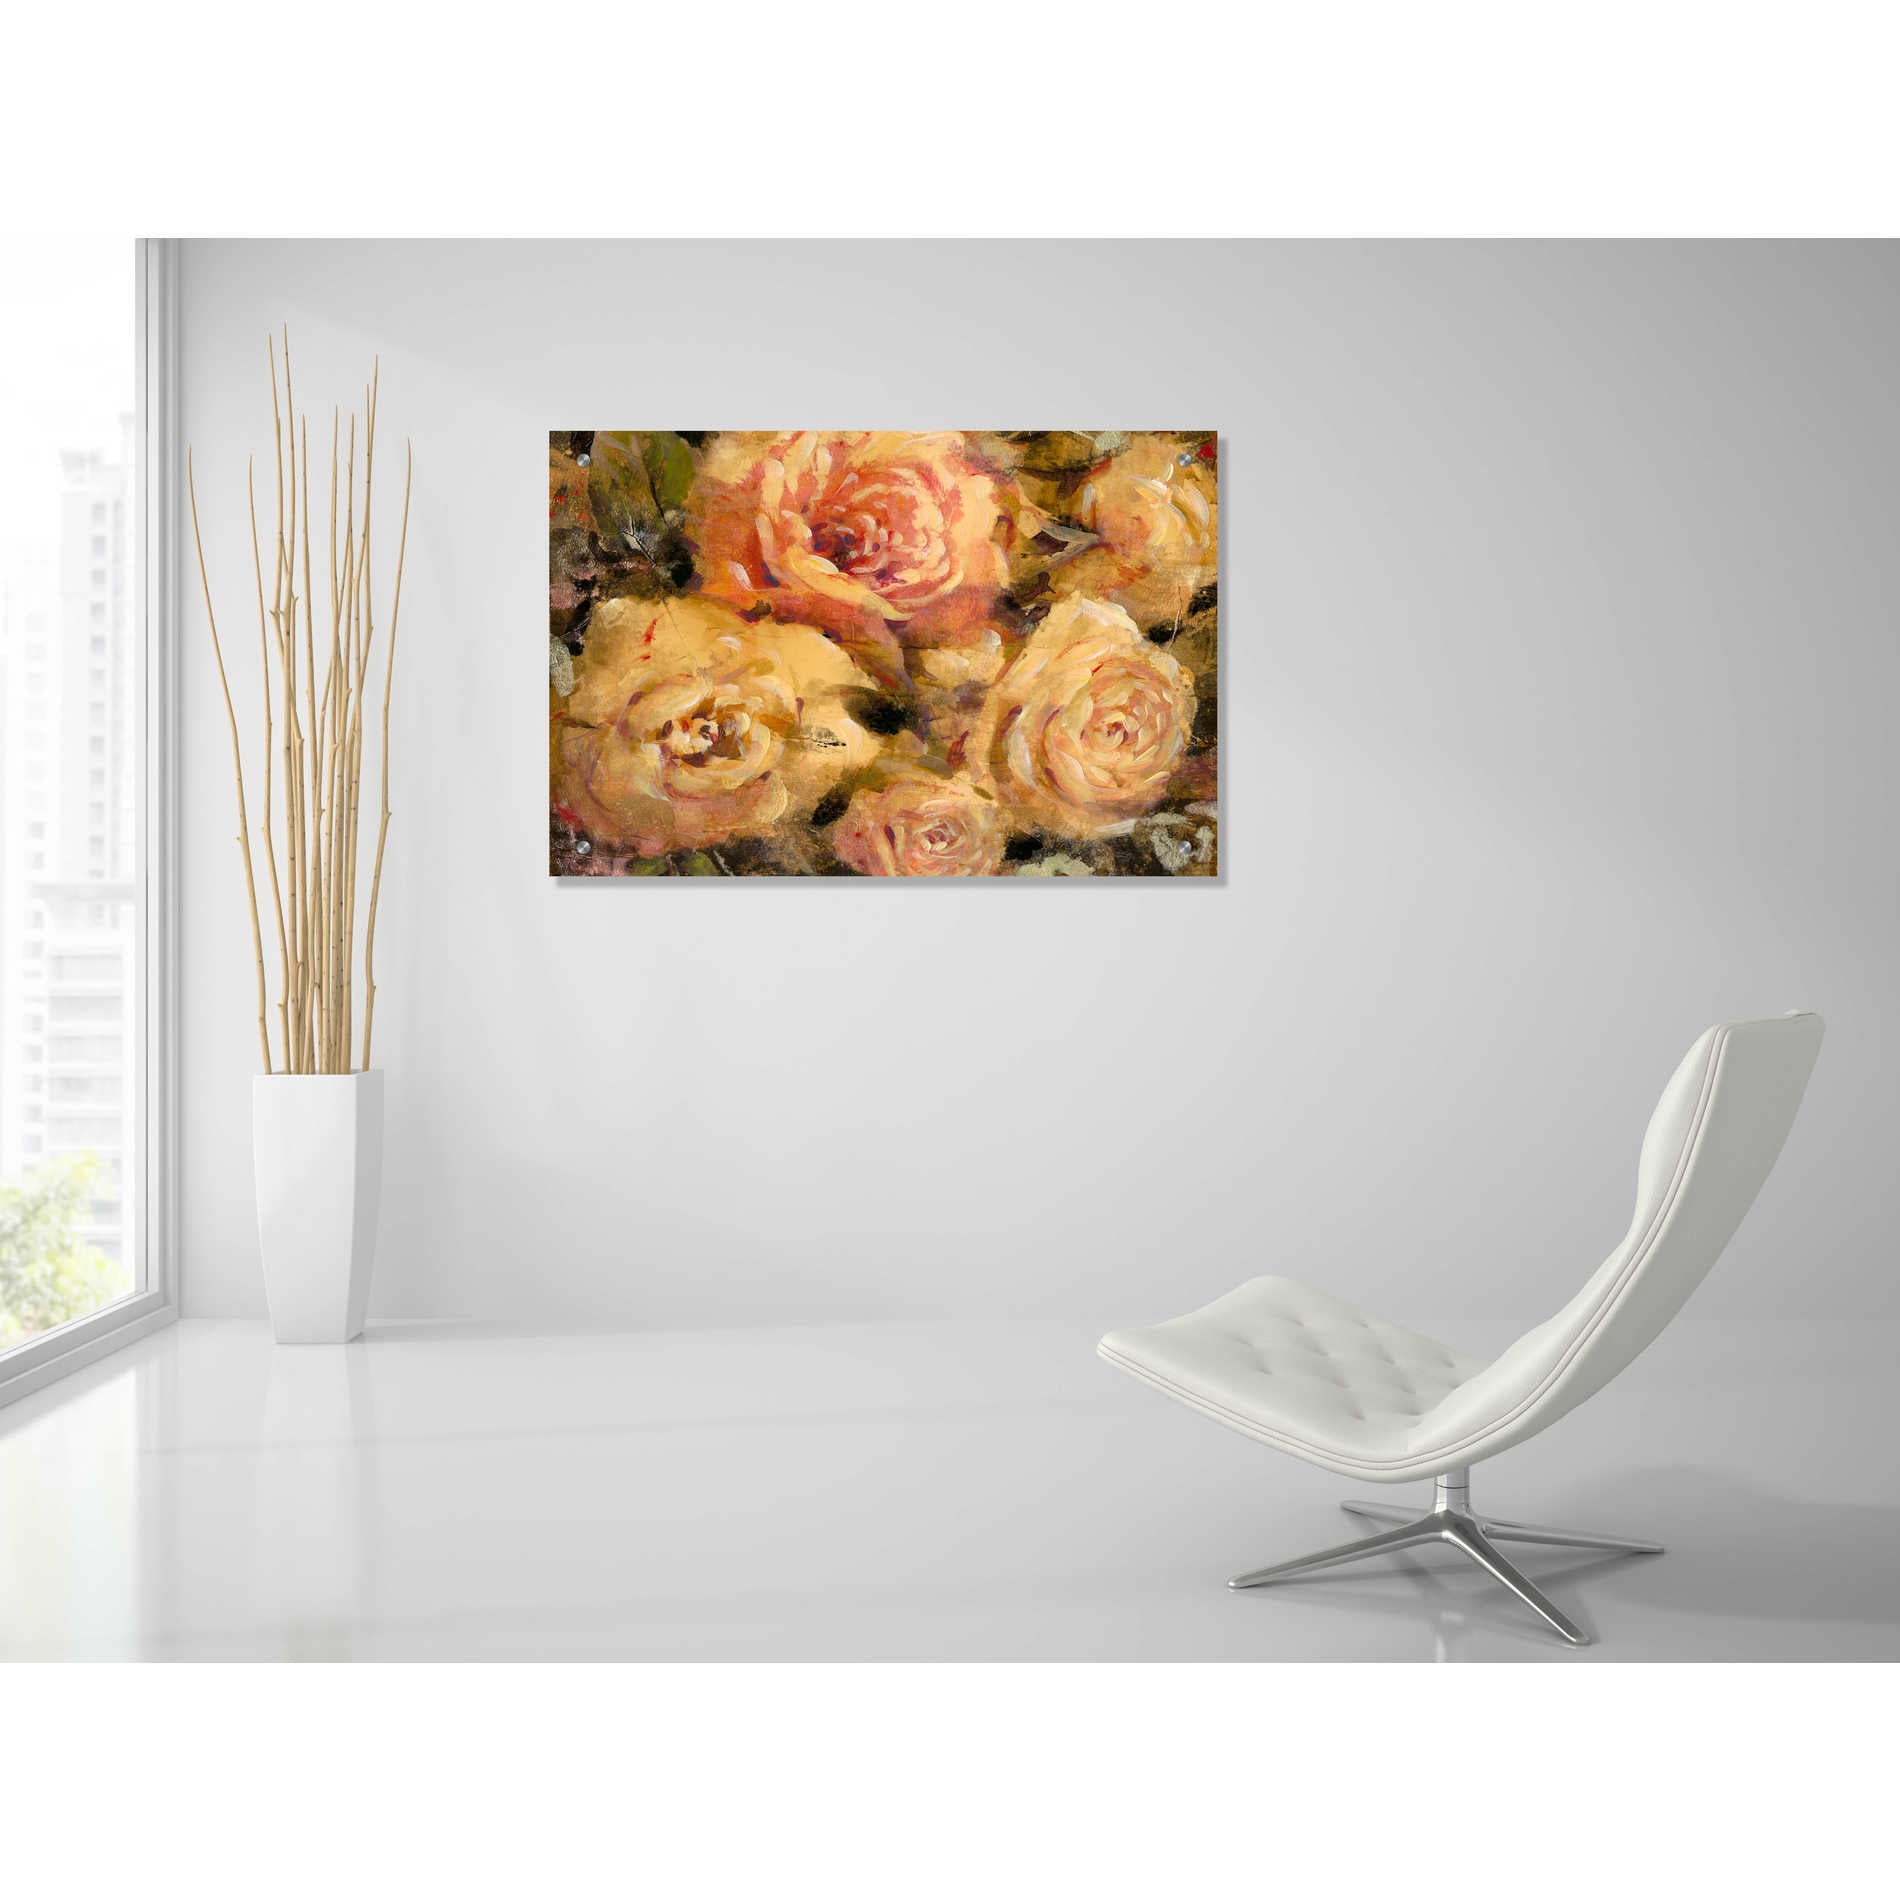 Epic Art 'Floral in Bloom II' by Tim O'Toole, Acrylic Glass Wall Art,36x24